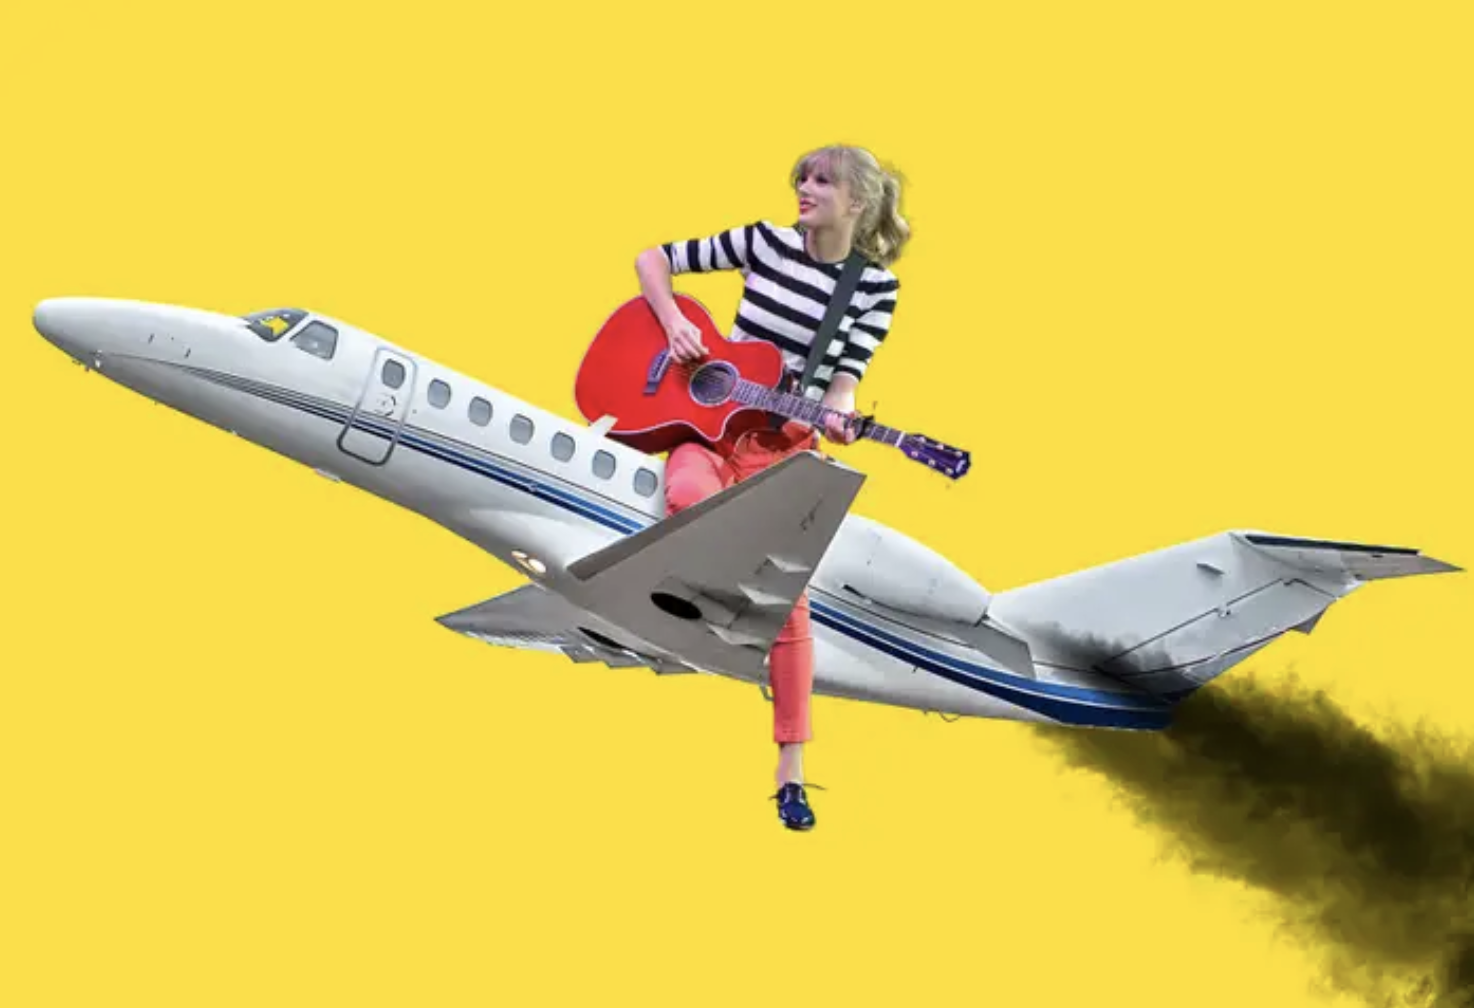 Taylor Swift holding an acoustic guitar sitting on top of a private jet against a yellow backdrop